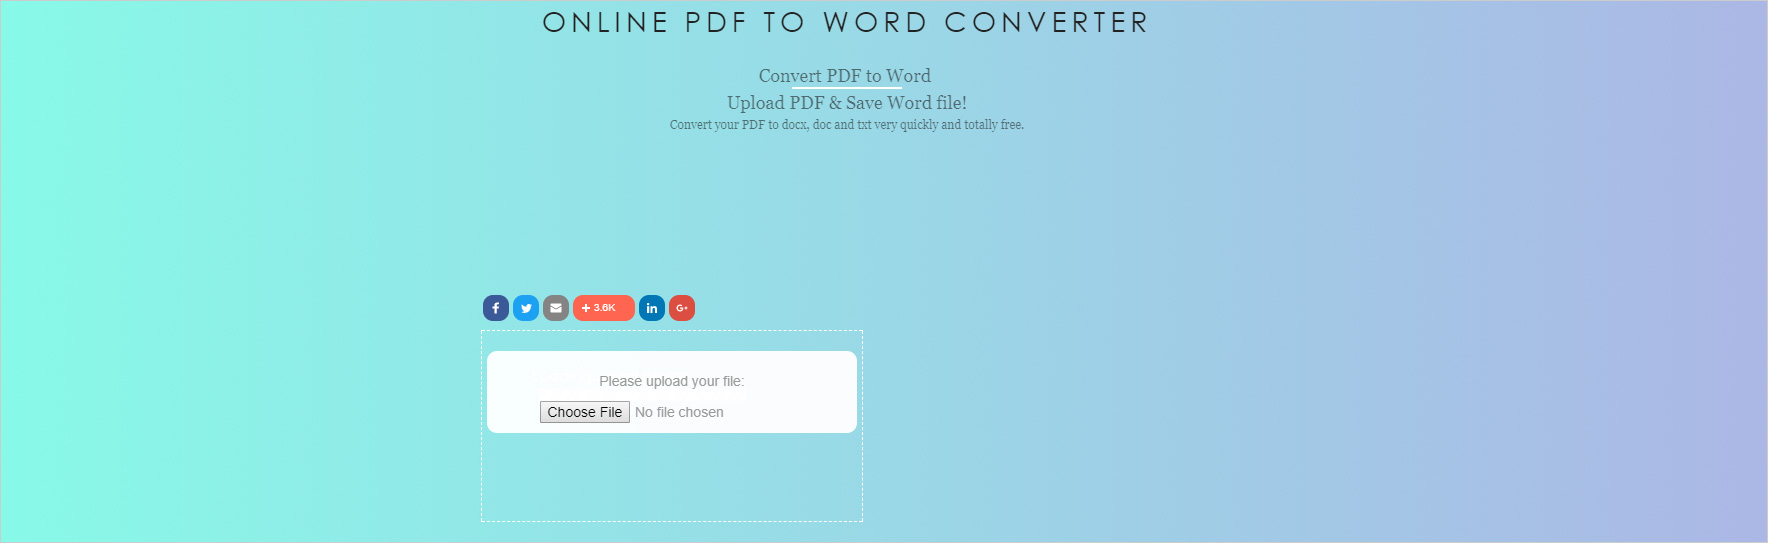 This is the site "convertpdftoword.net".